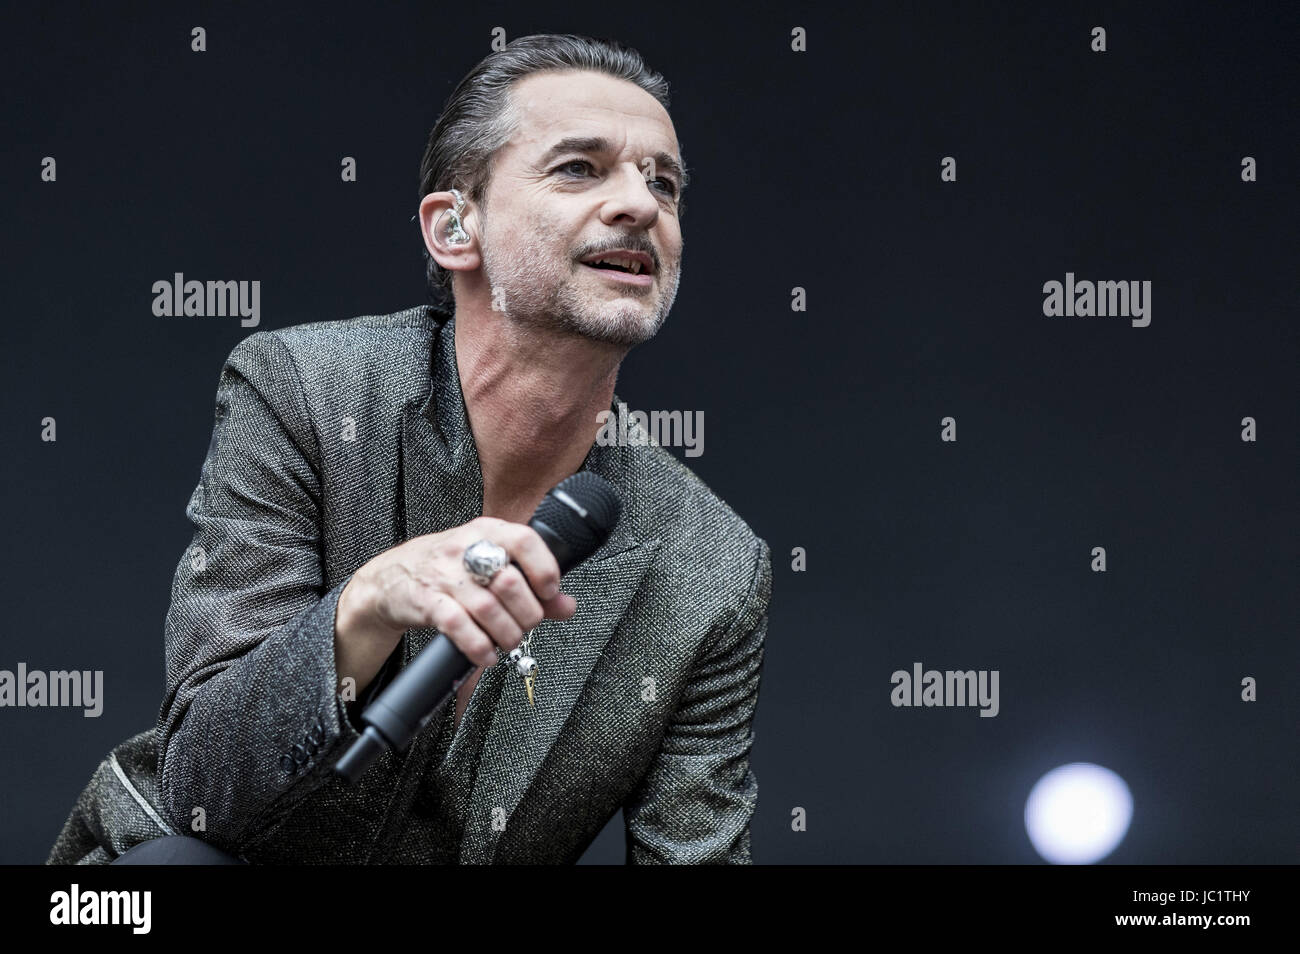 Hannover, Germany. 11th June, 2017. Dave Gahan of Depeche Mode performs  live on stage during the 'Global Spirit Tour' at the HDI Arena on June 11,  2017 in Hannover, Germany. | Verwendung